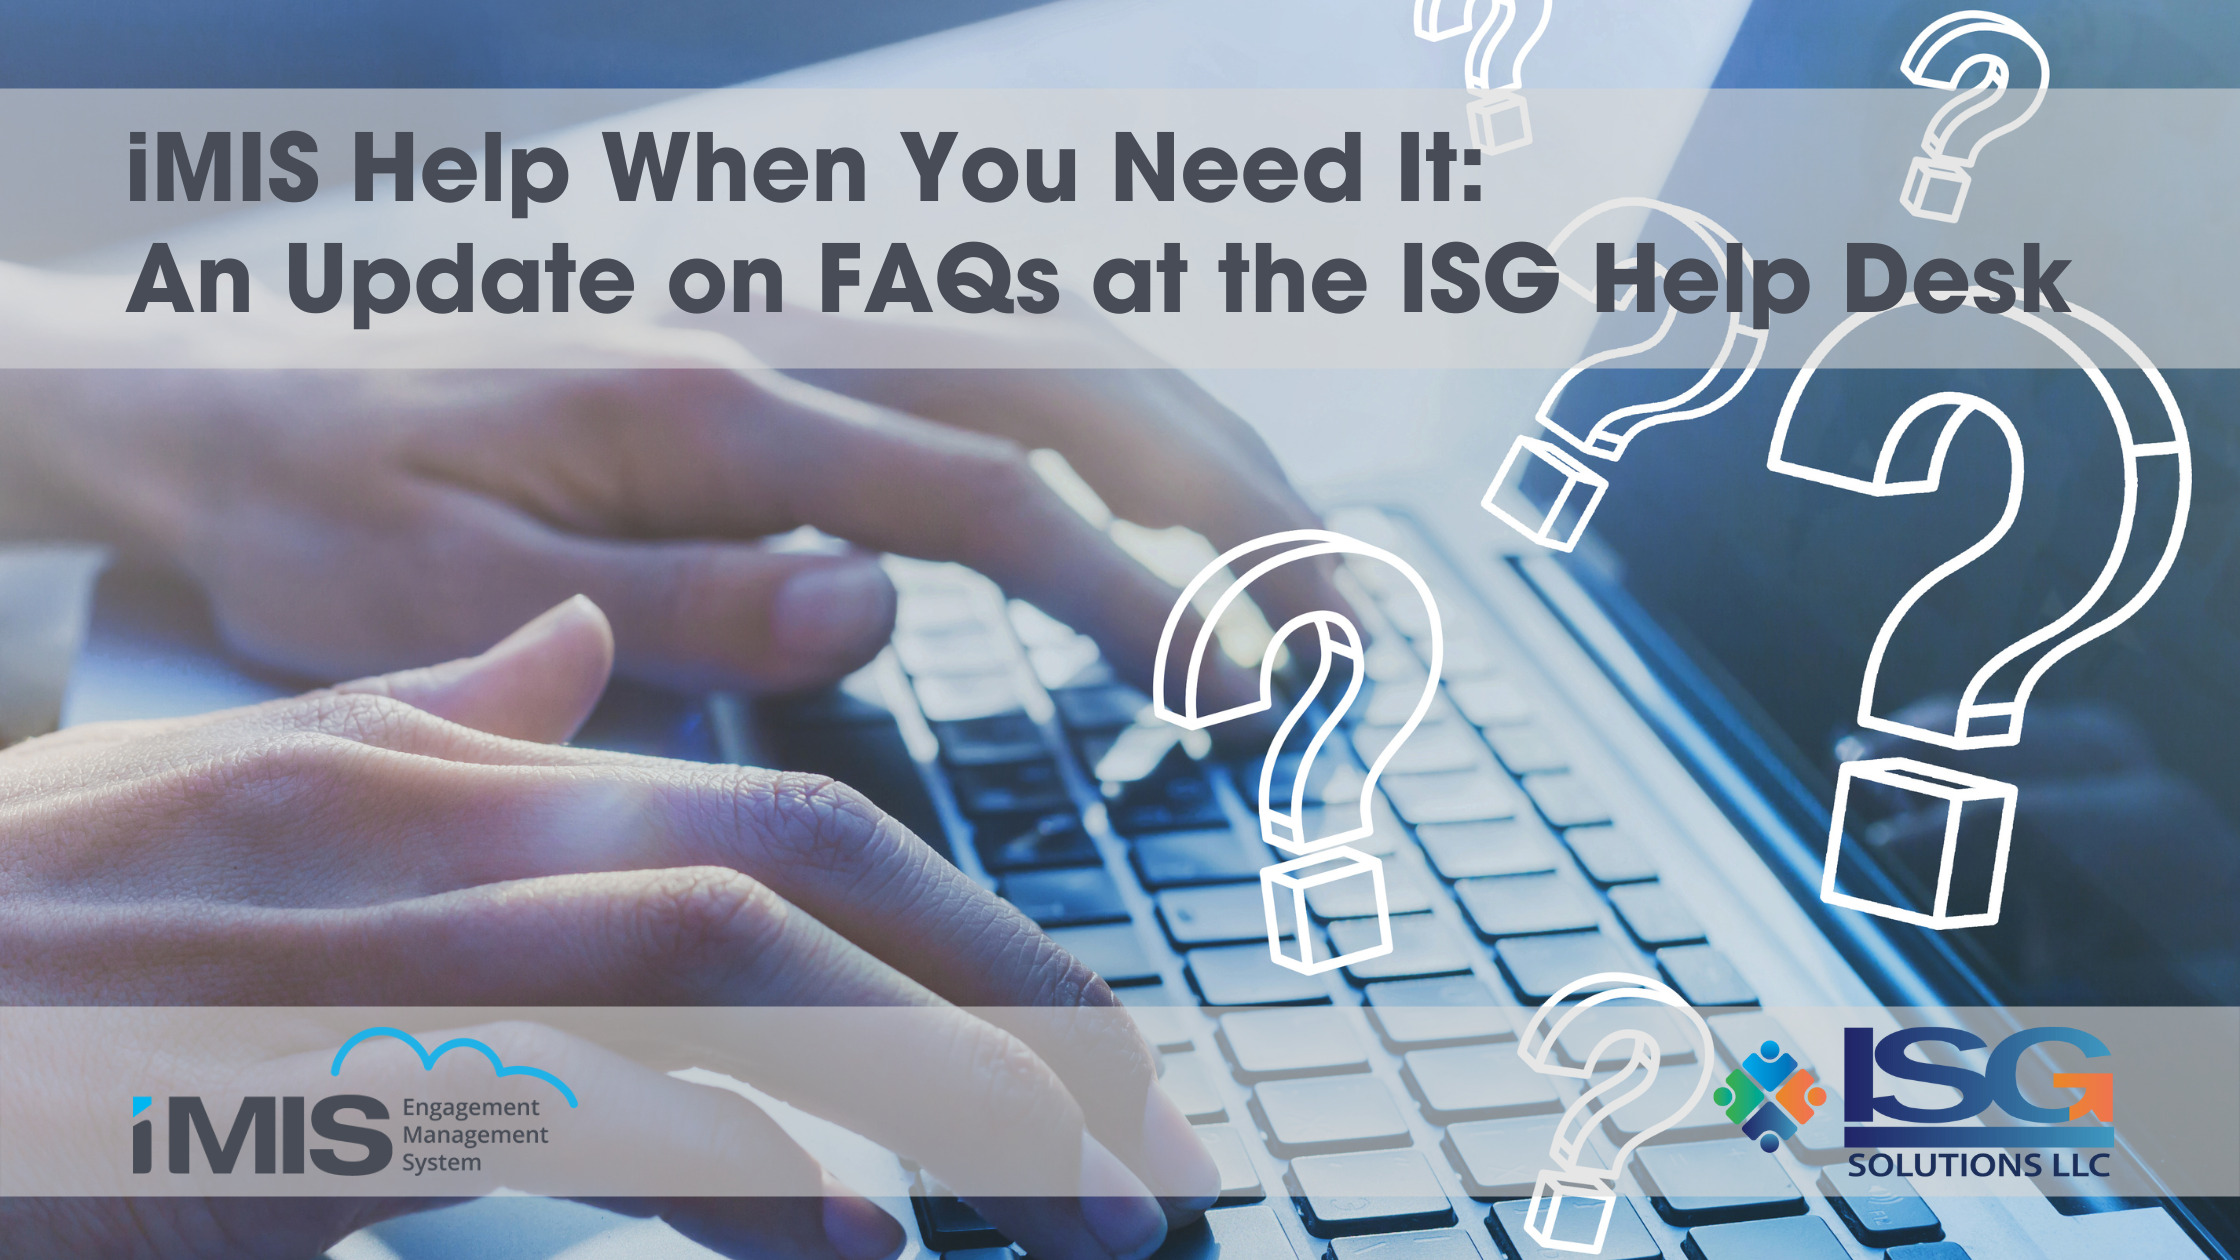 iMIS Help When You Need It: An Update on FAQs at the ISG Help Desk